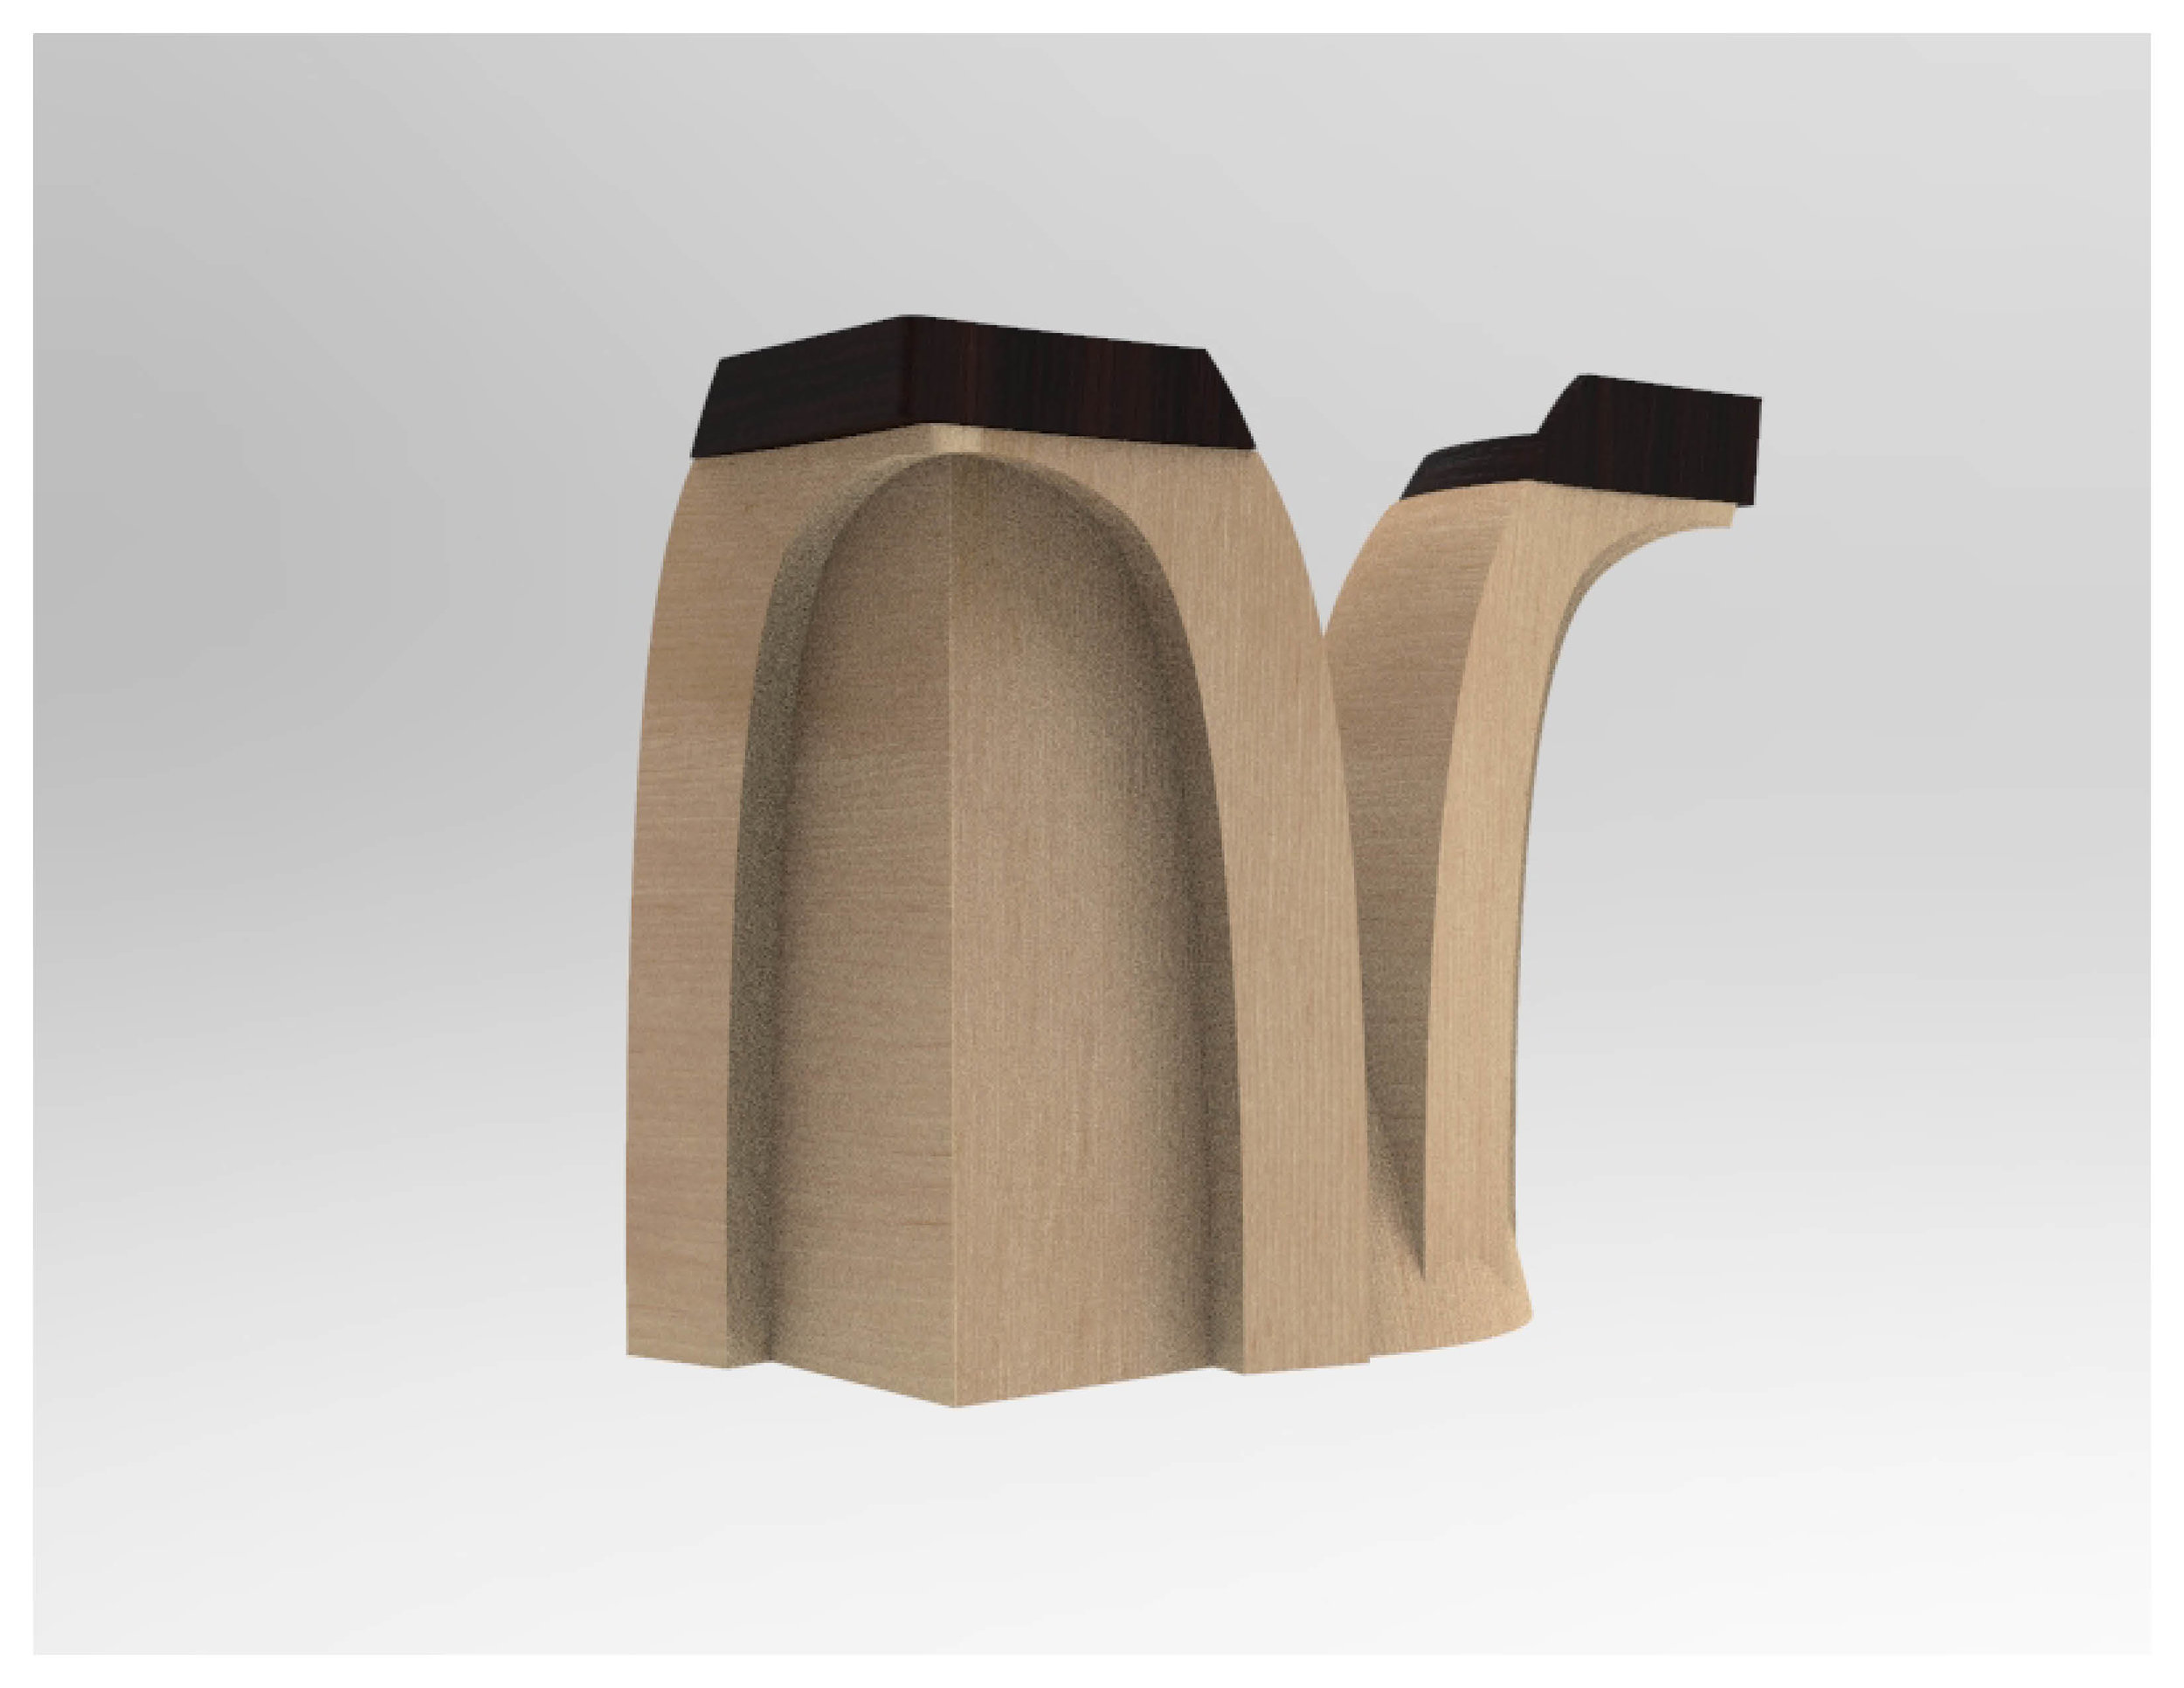 Stool Concept 3: Perspective View 2 (Constructed)